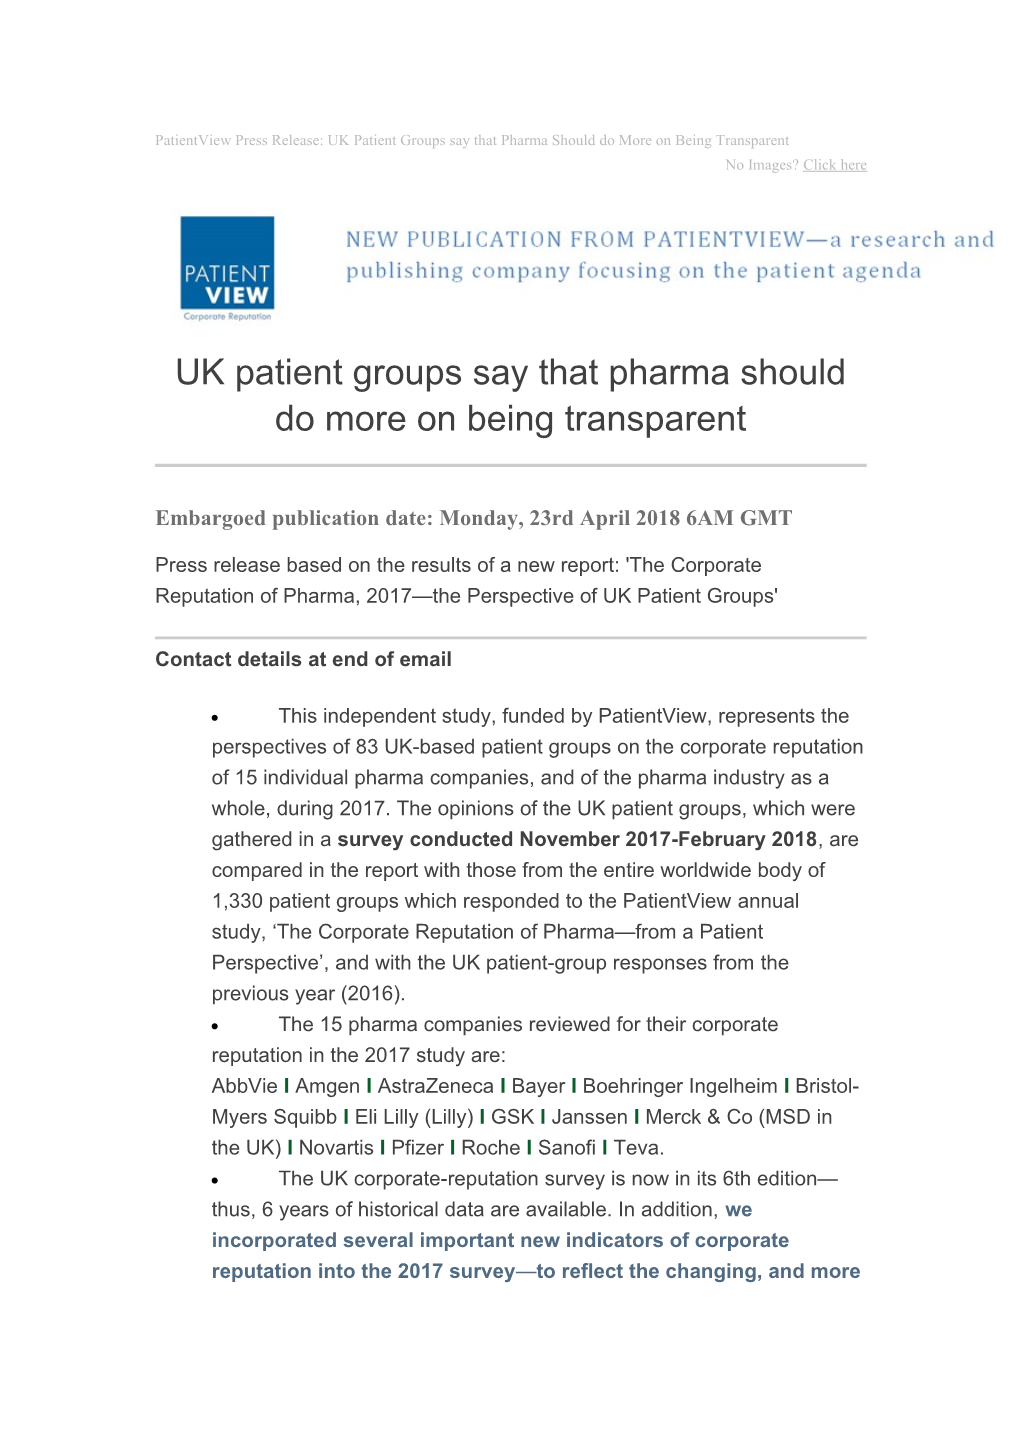 Patientview Press Release: UK Patient Groups Say That Pharma Should Do More on Being Transparent